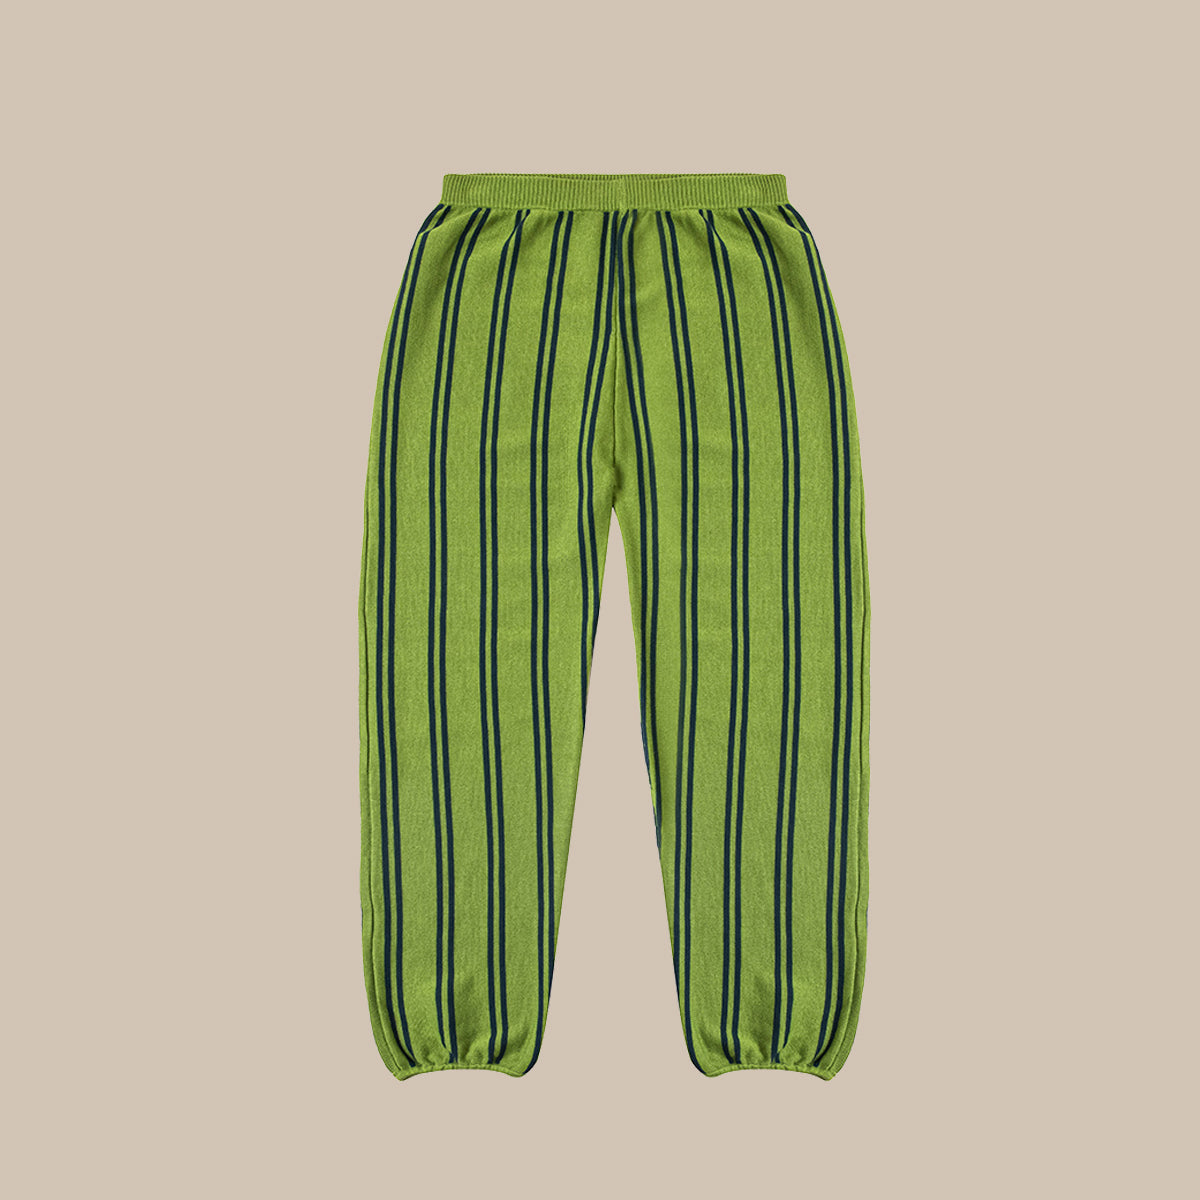 CASUAL TROUSERS (ANKLE LENGTH)

/LAWNGREEN/NAVY